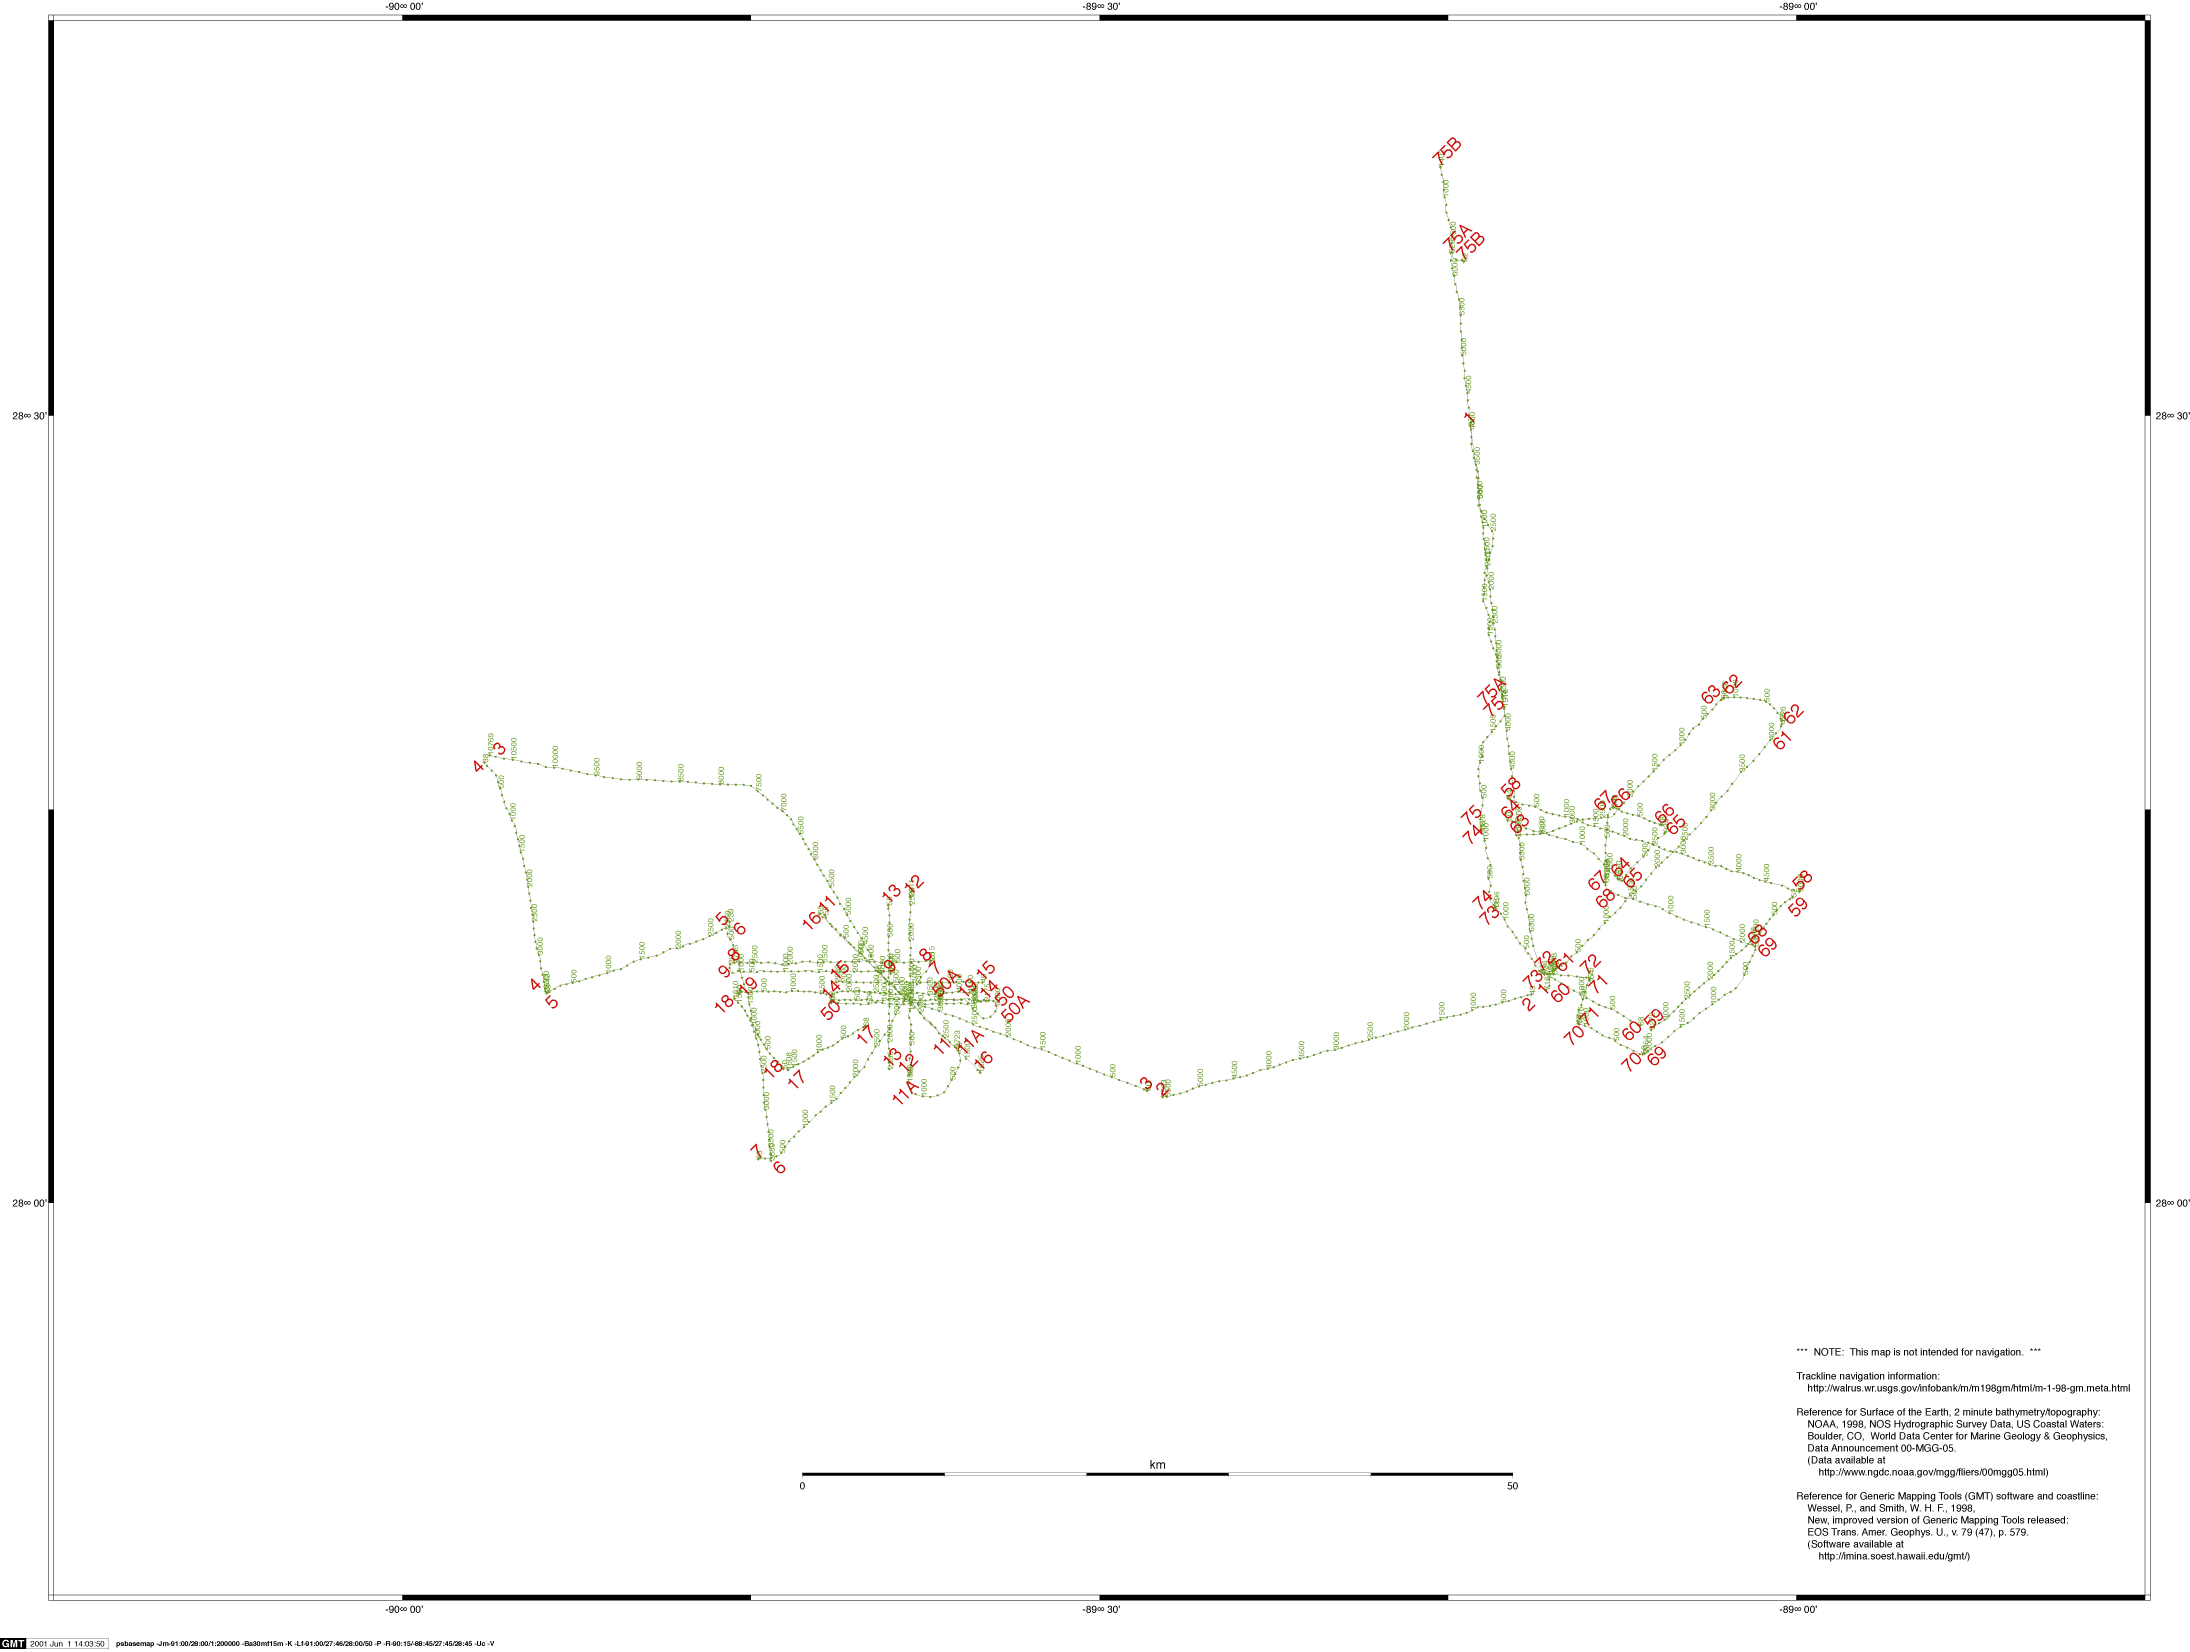 1998 trackline map with CDP numbers